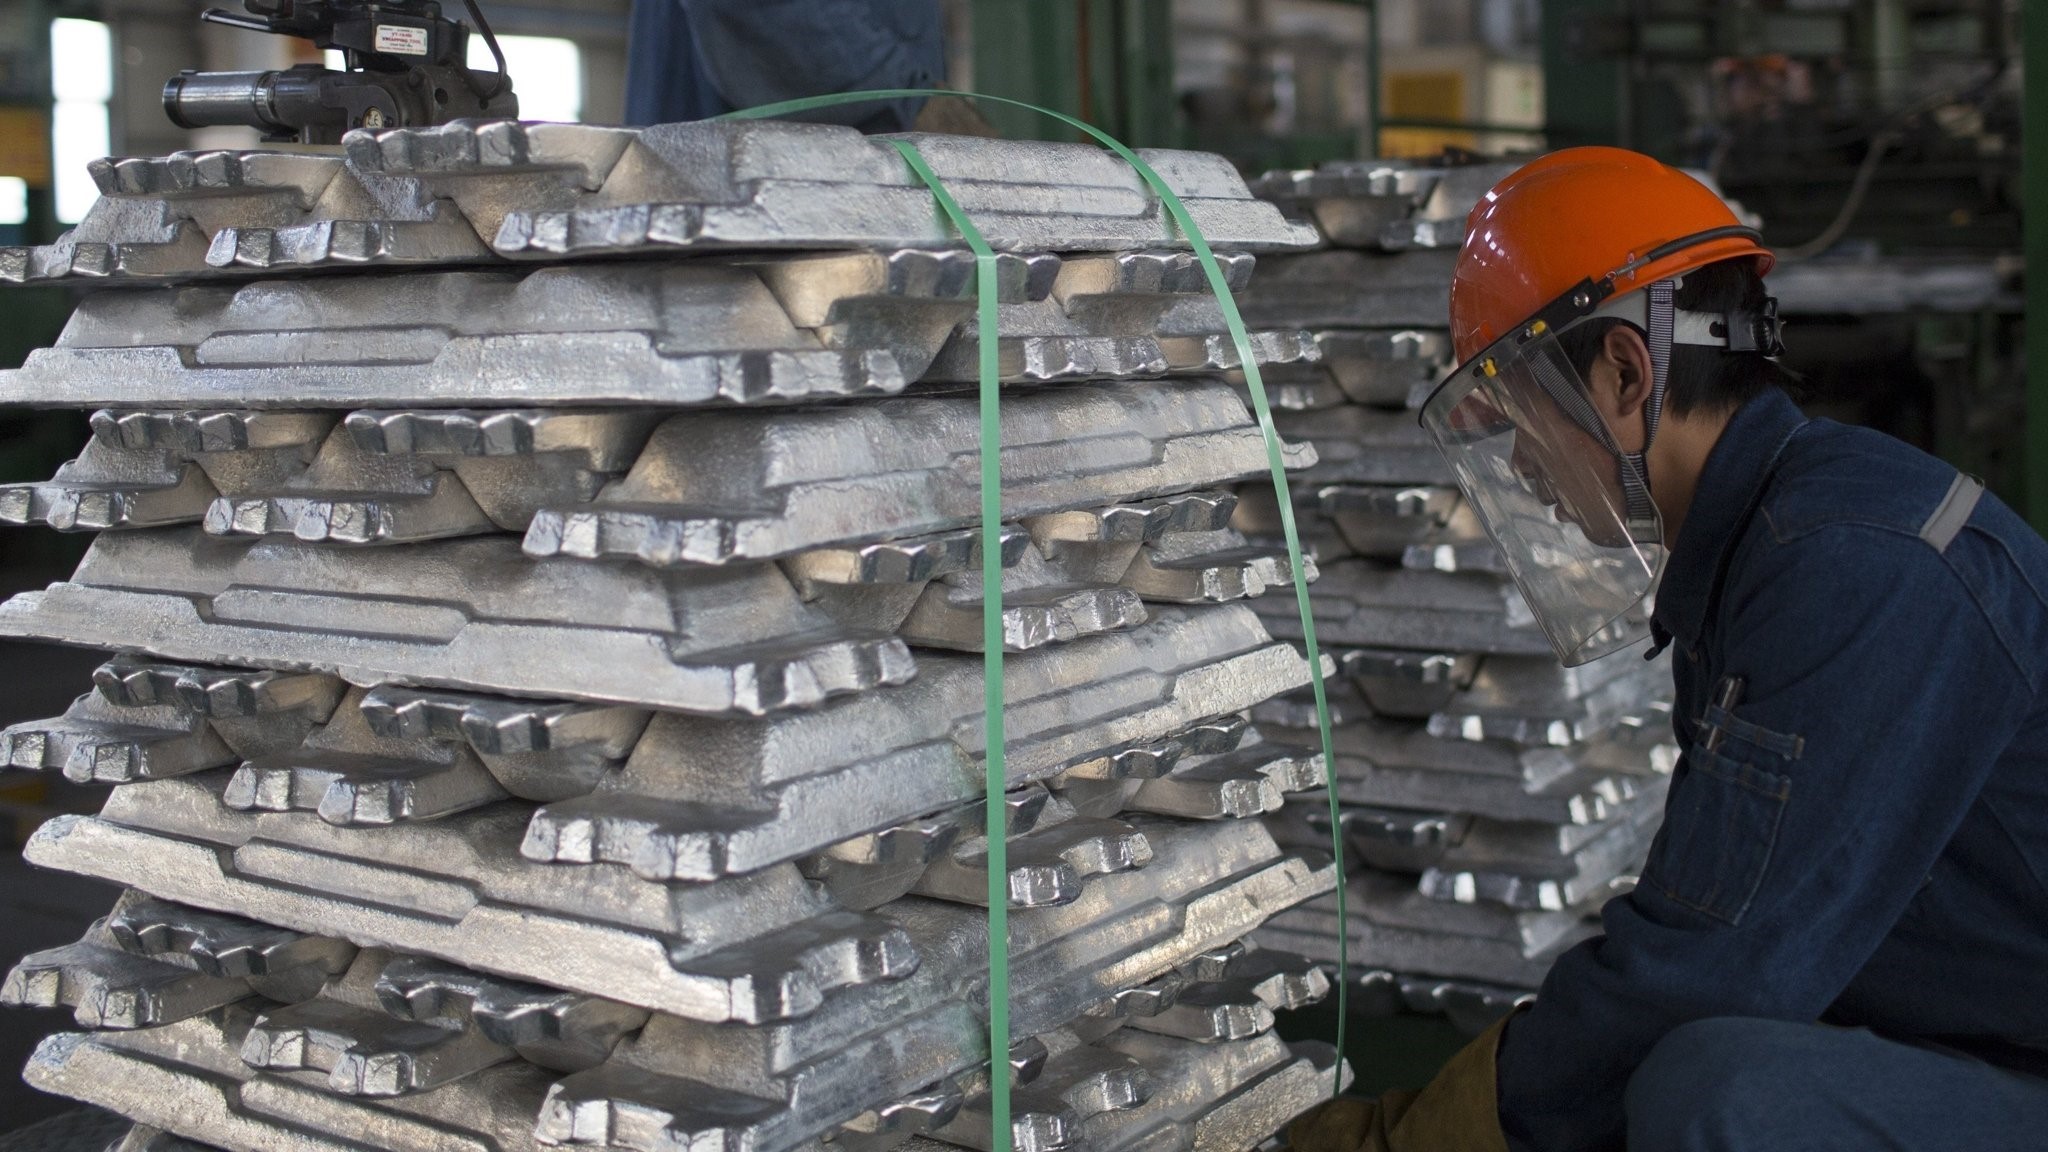 Primary aluminium weekly recap: Alcoa supports Rusal's call for LME to disclose the source of all metal stocks; Sales of two smelting giants surge following LME's rejection of Russian metal ban